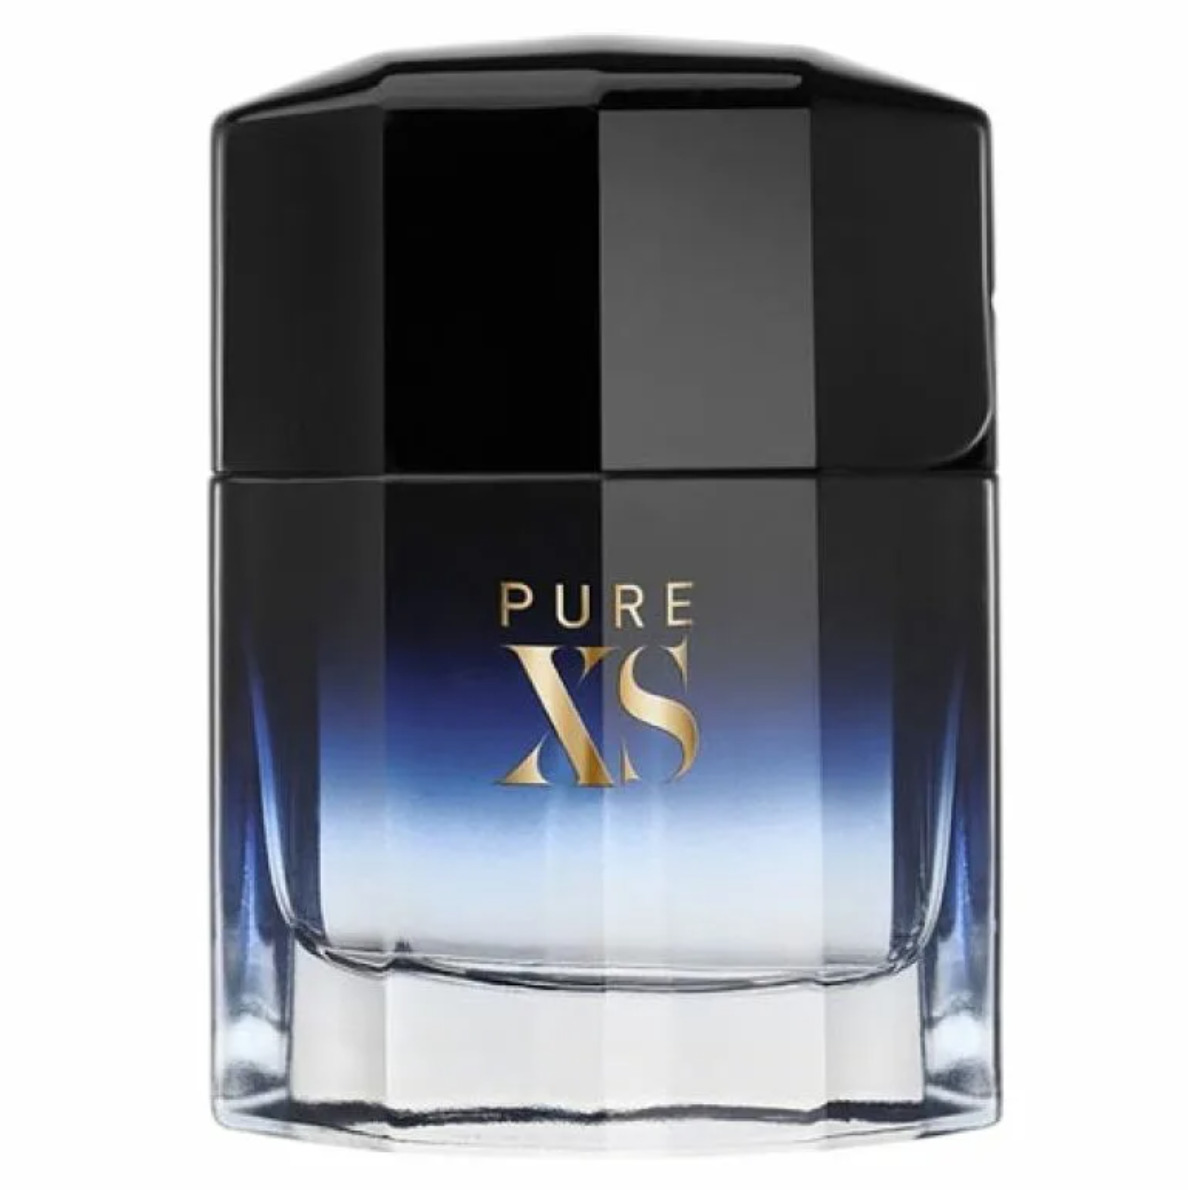 Paco Rabanne Pure XS for him. Paco Rabanne Pure XS мужской. Пако Рабан XS духи мужские Pure. Paco Rabanne XS туалетная вода 100 мл.